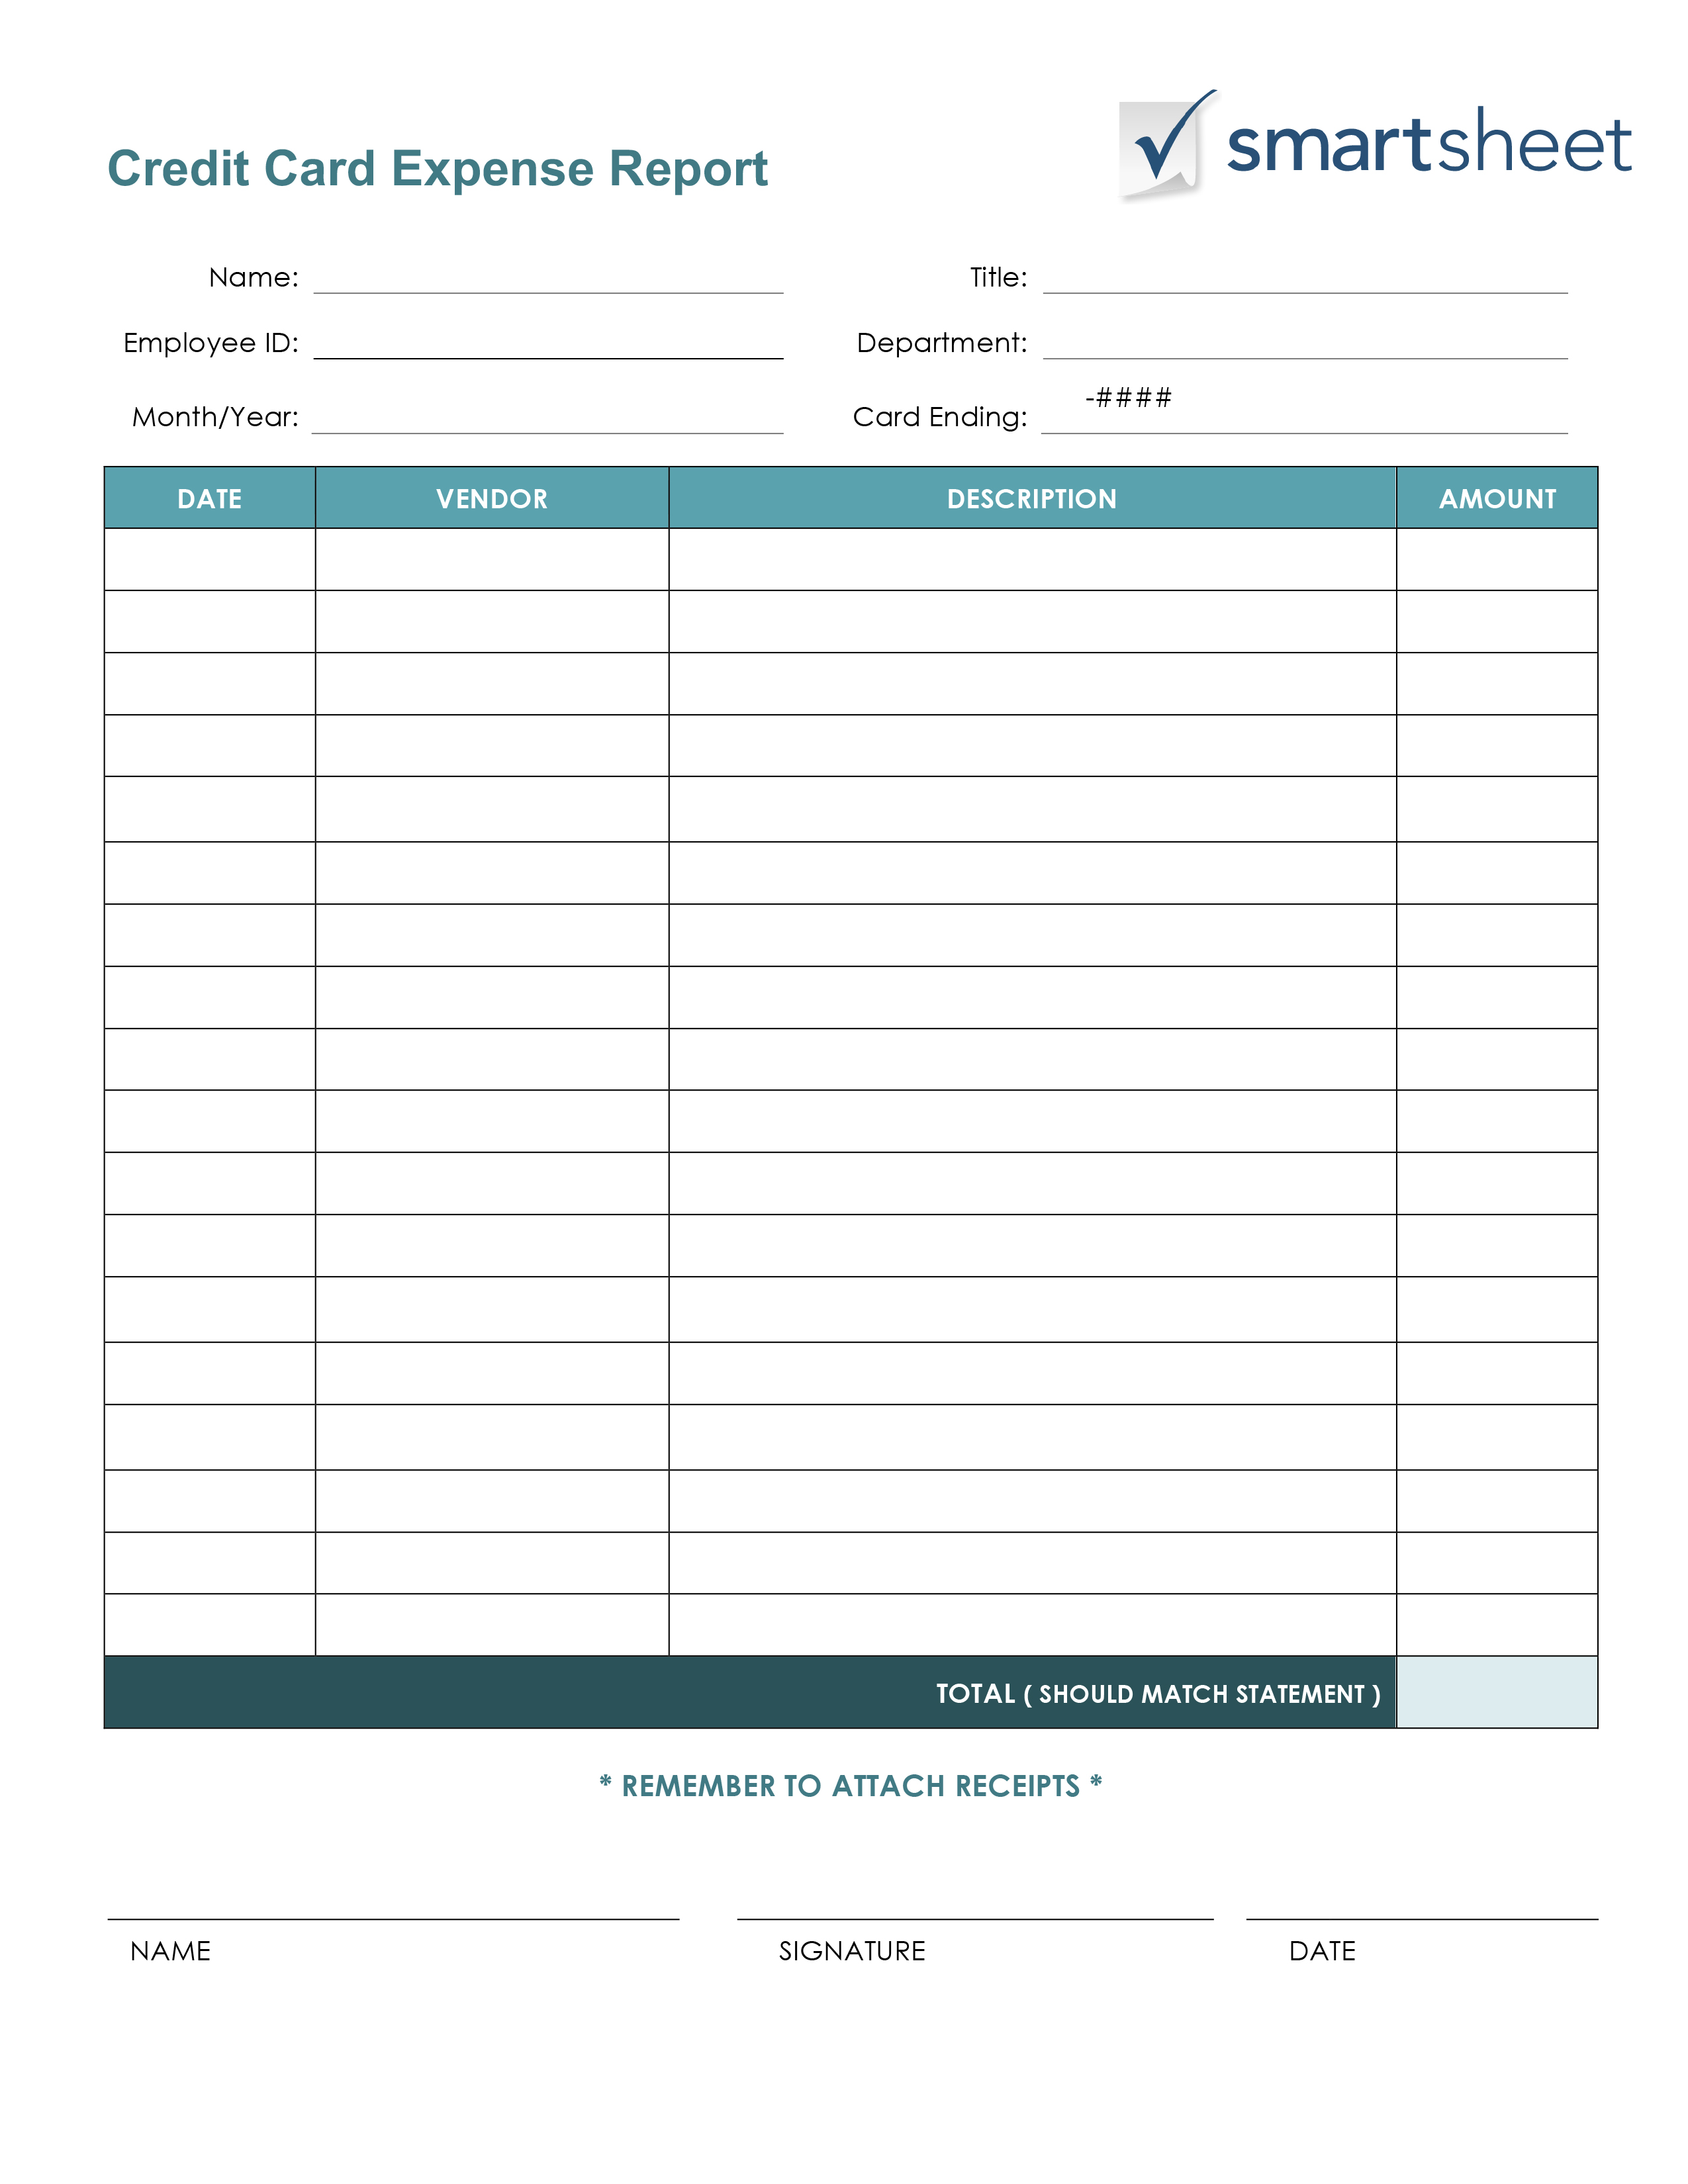 hotel expense report template   Boat.jeremyeaton.co